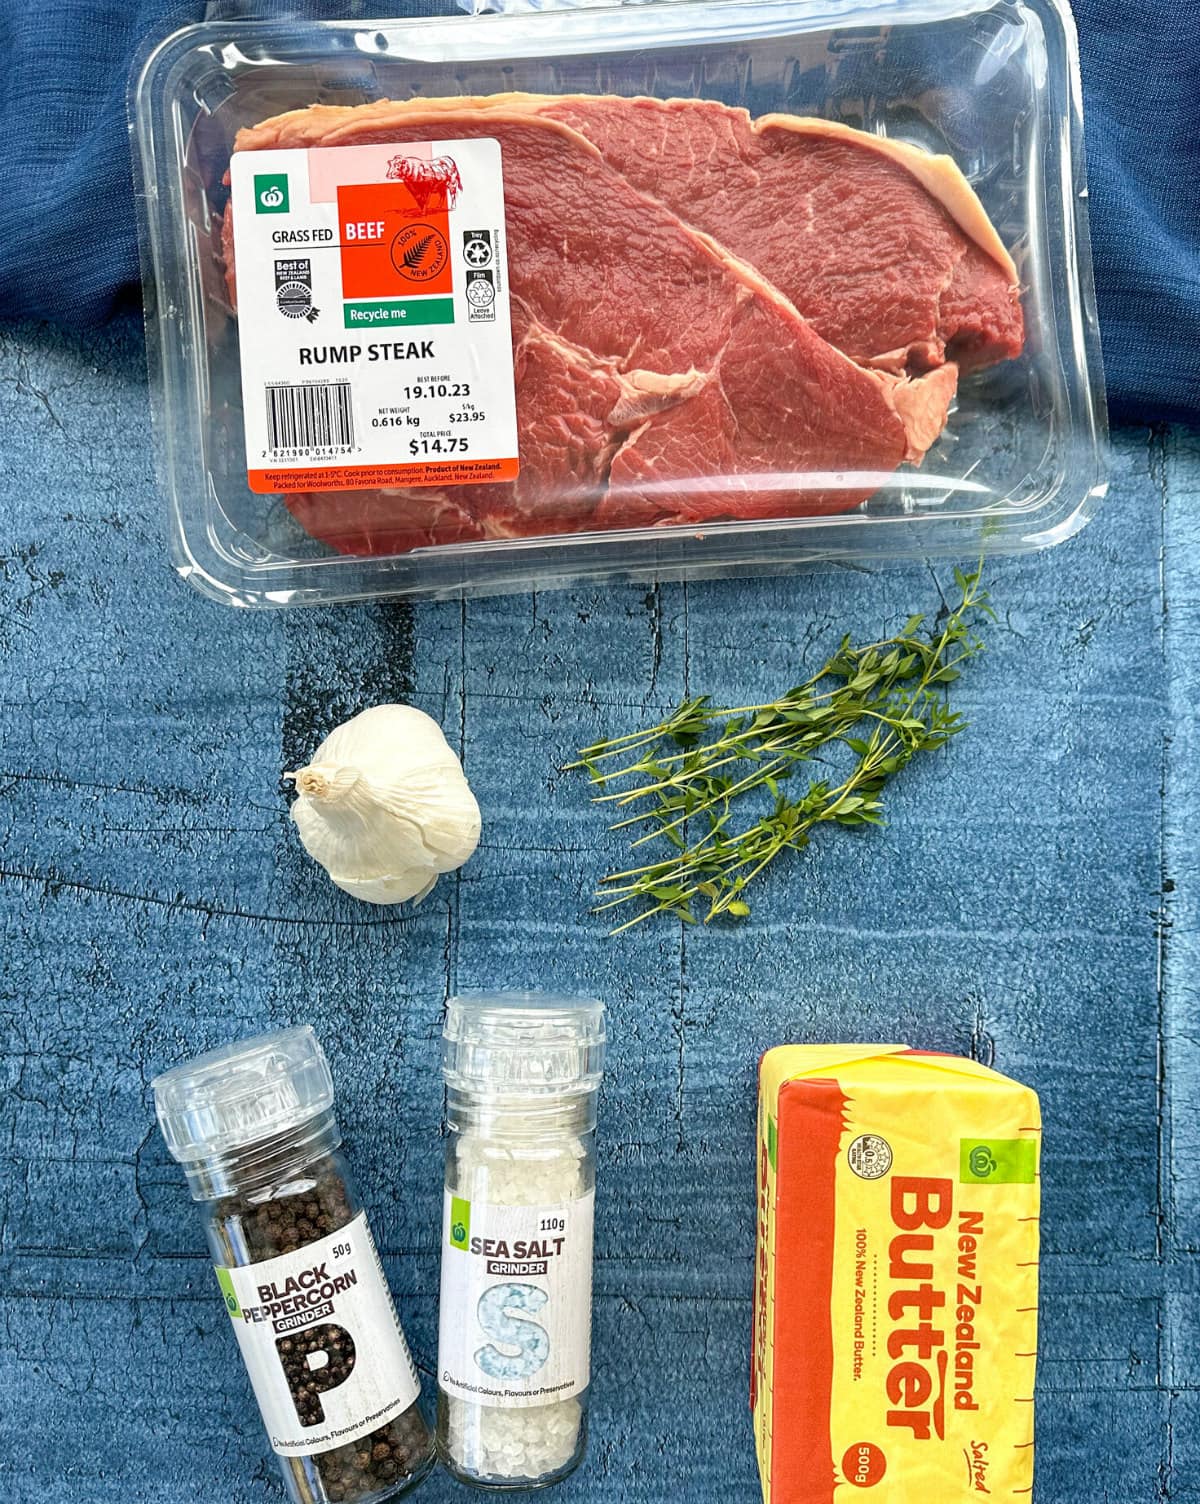 Ingredients for the perfect rump steak